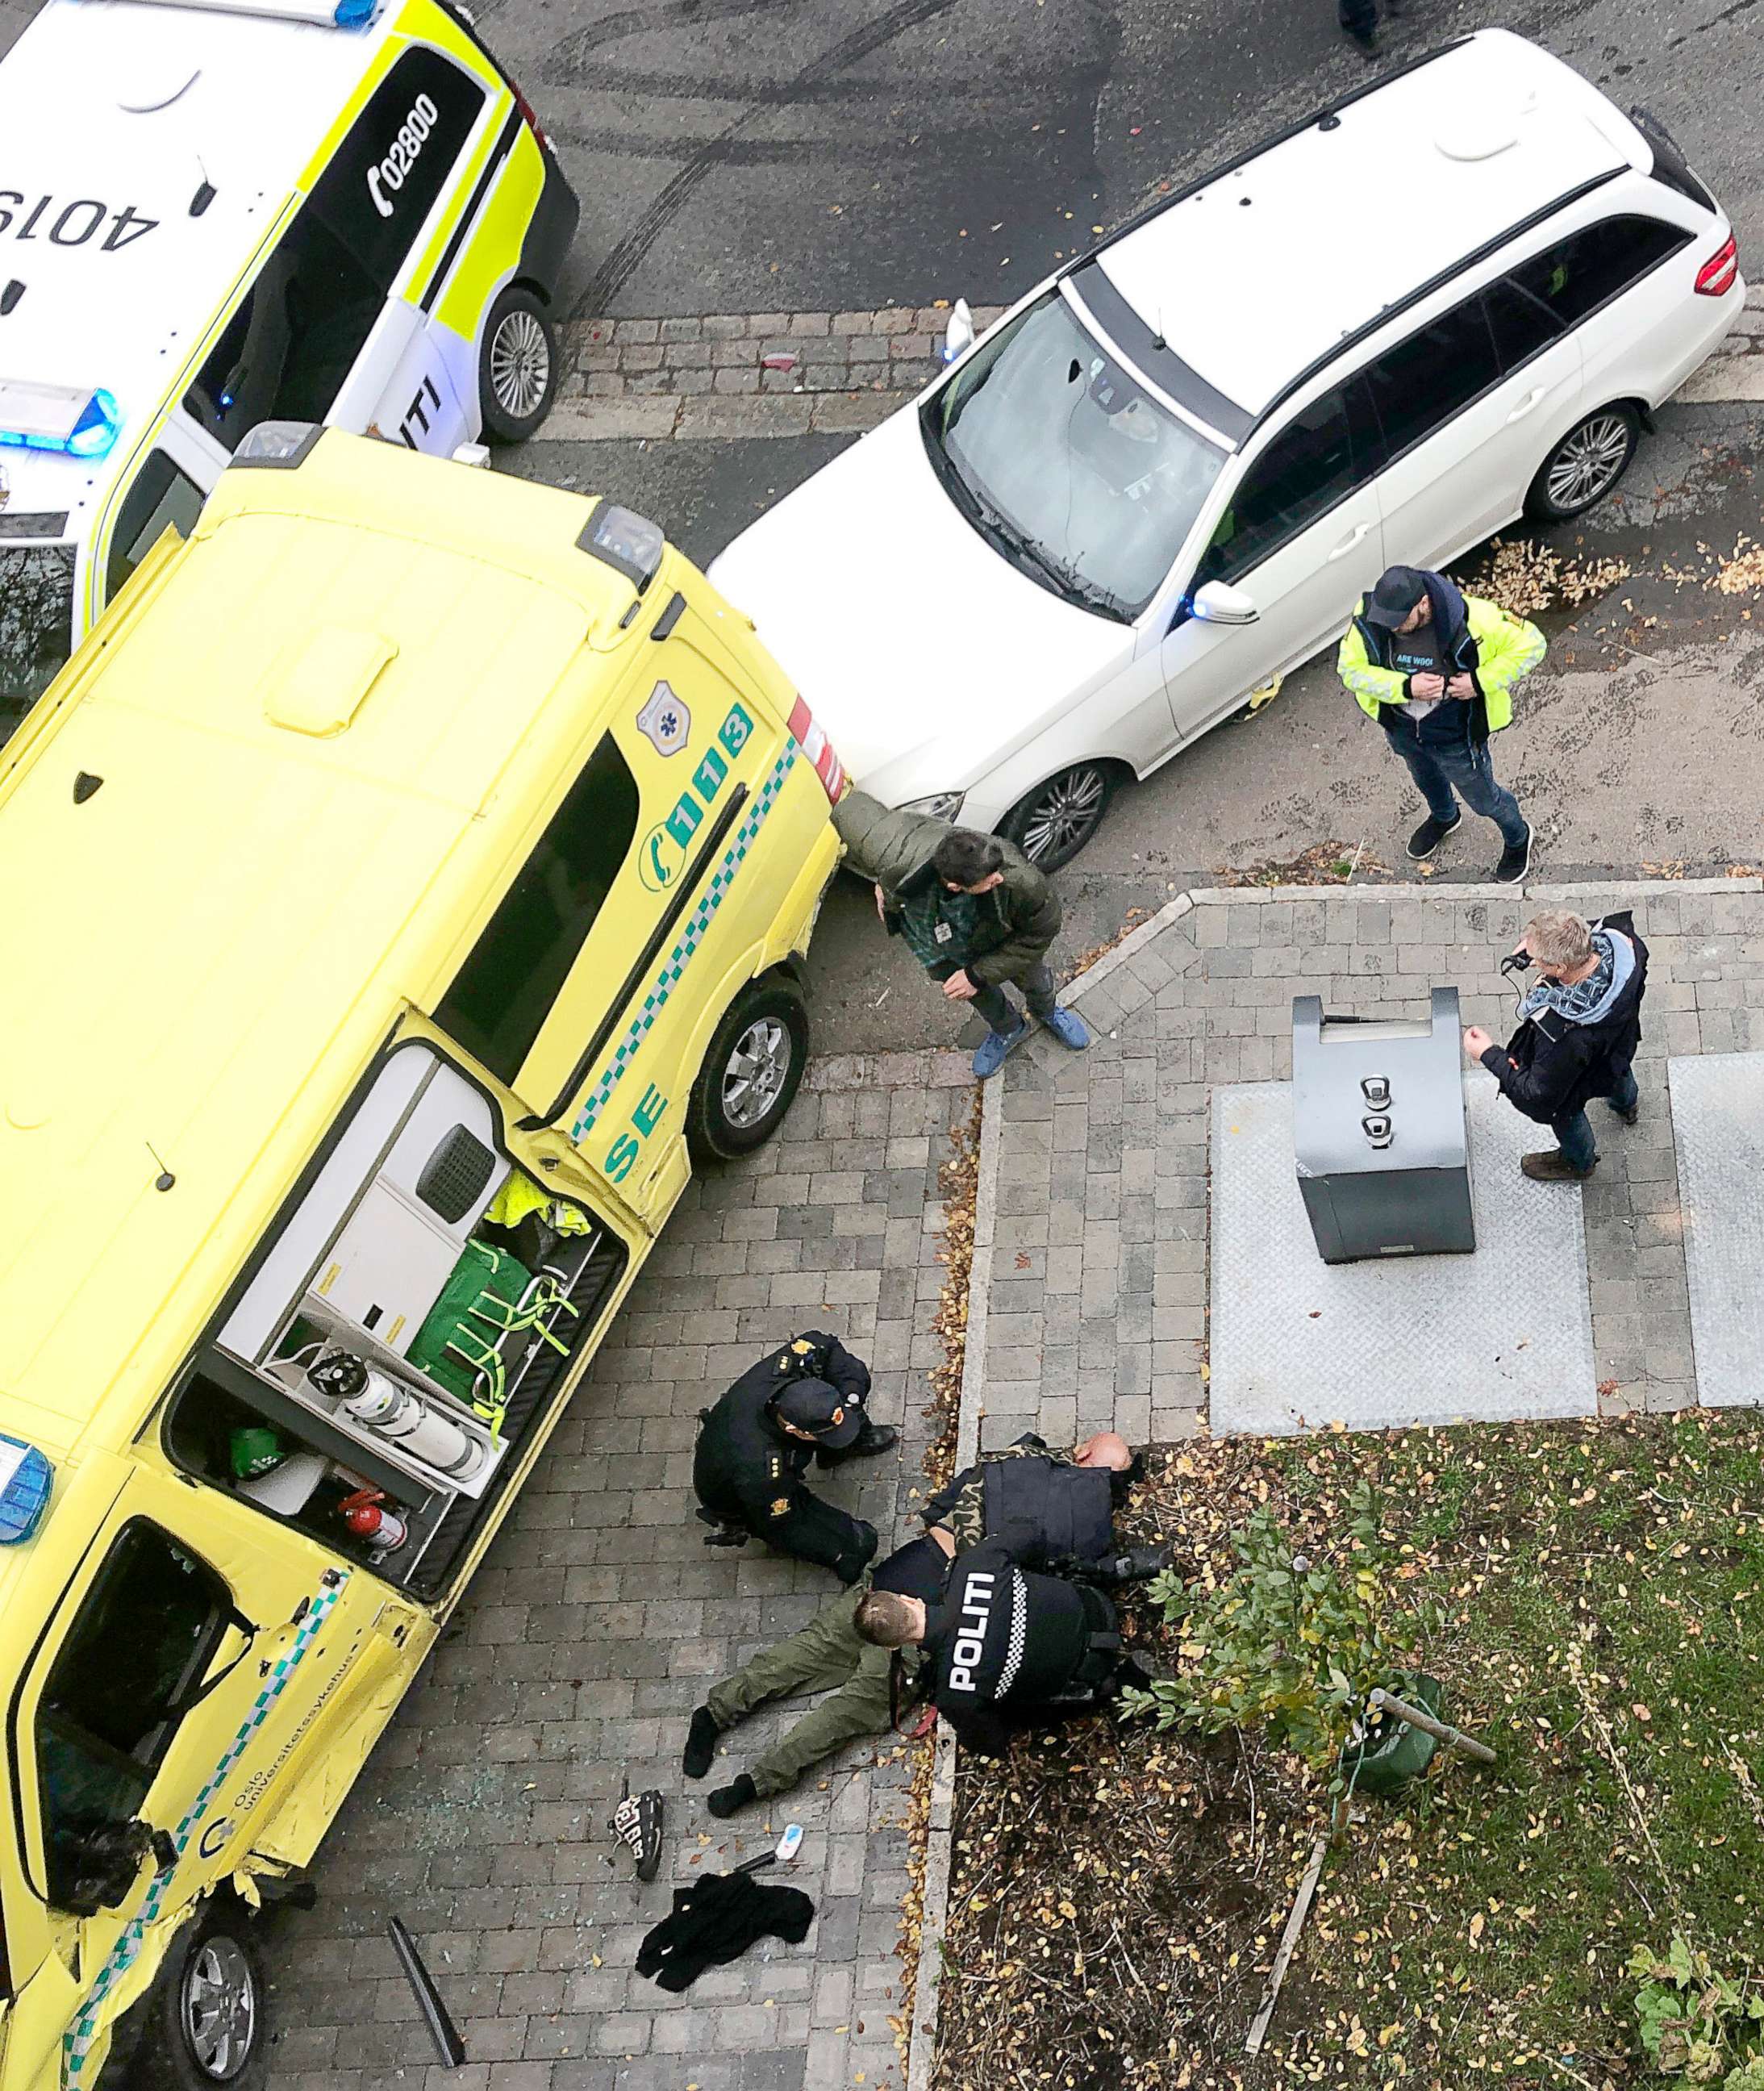 PHOTO: Police detain a man, bottom center laying on the ground, next to a damaged ambulance that he stole after an incident in the center of Oslo, Tuesday, Oct. 22, 2019. (Cathrine Hellesoy, Aftenposten via AP) 